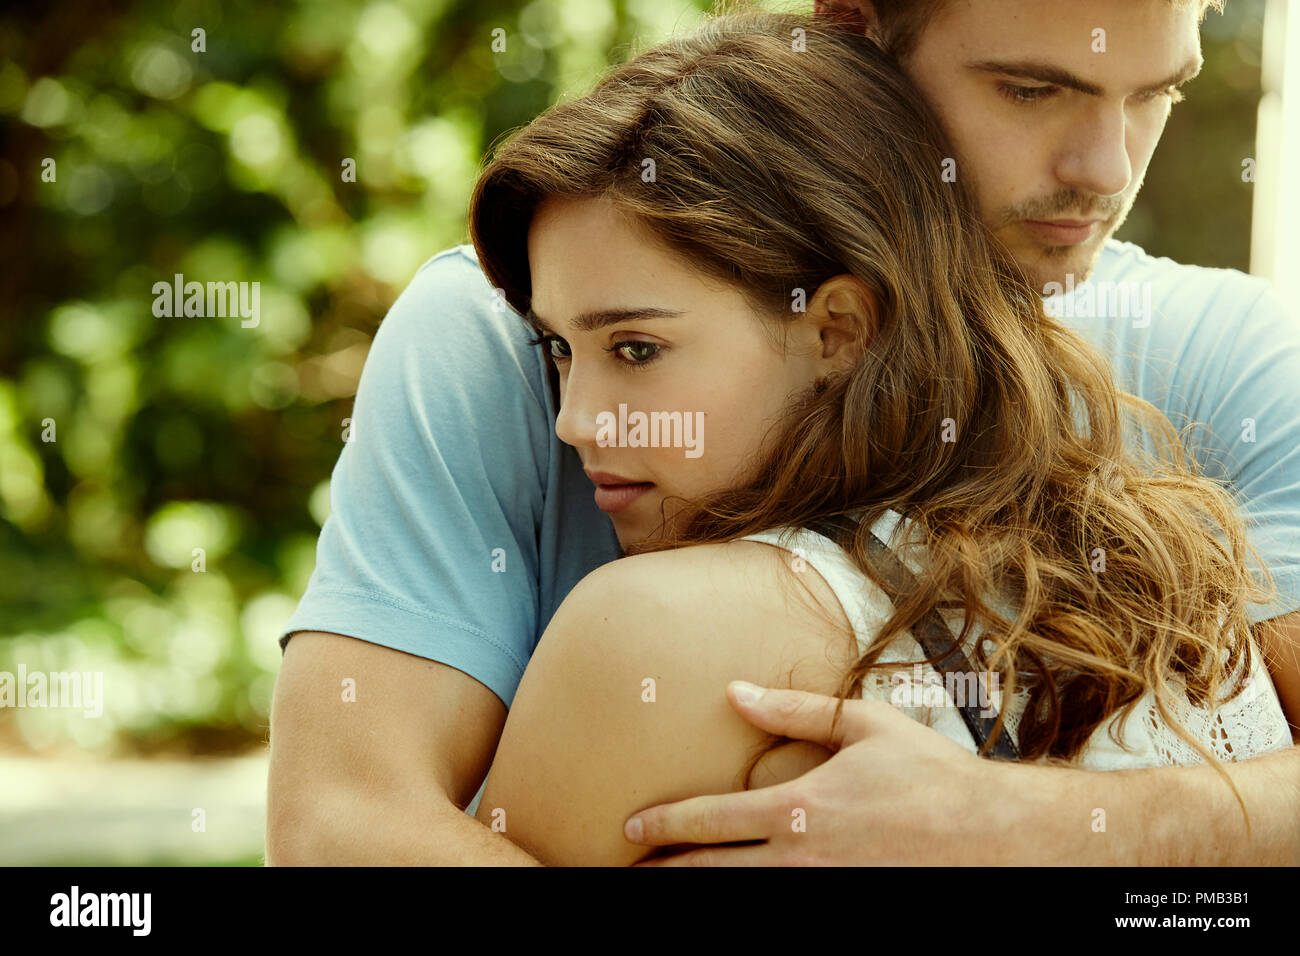 Matilda Lutz as Julia and Alex Roe as Holt in RINGS by Paramount Pictures  (2017 Stock Photo - Alamy